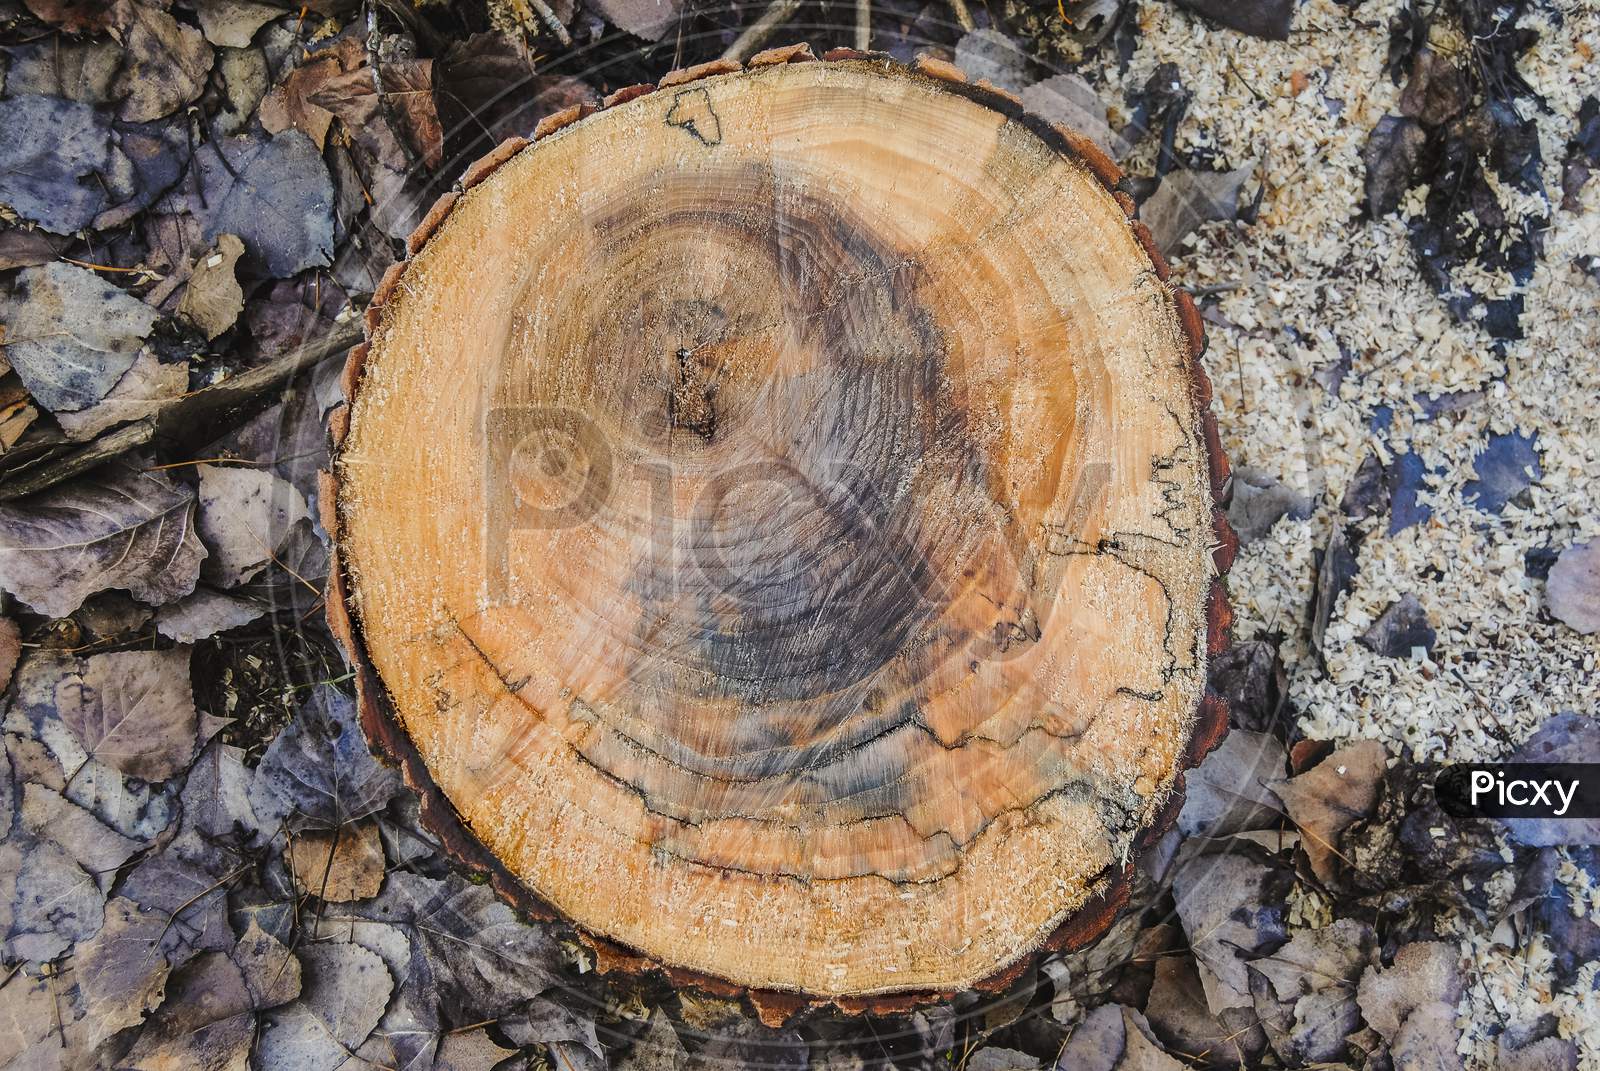 Texture Of A Old Wooden Log With Of Age Lines Marks Surrounded By Wet Leaves And Sawdust